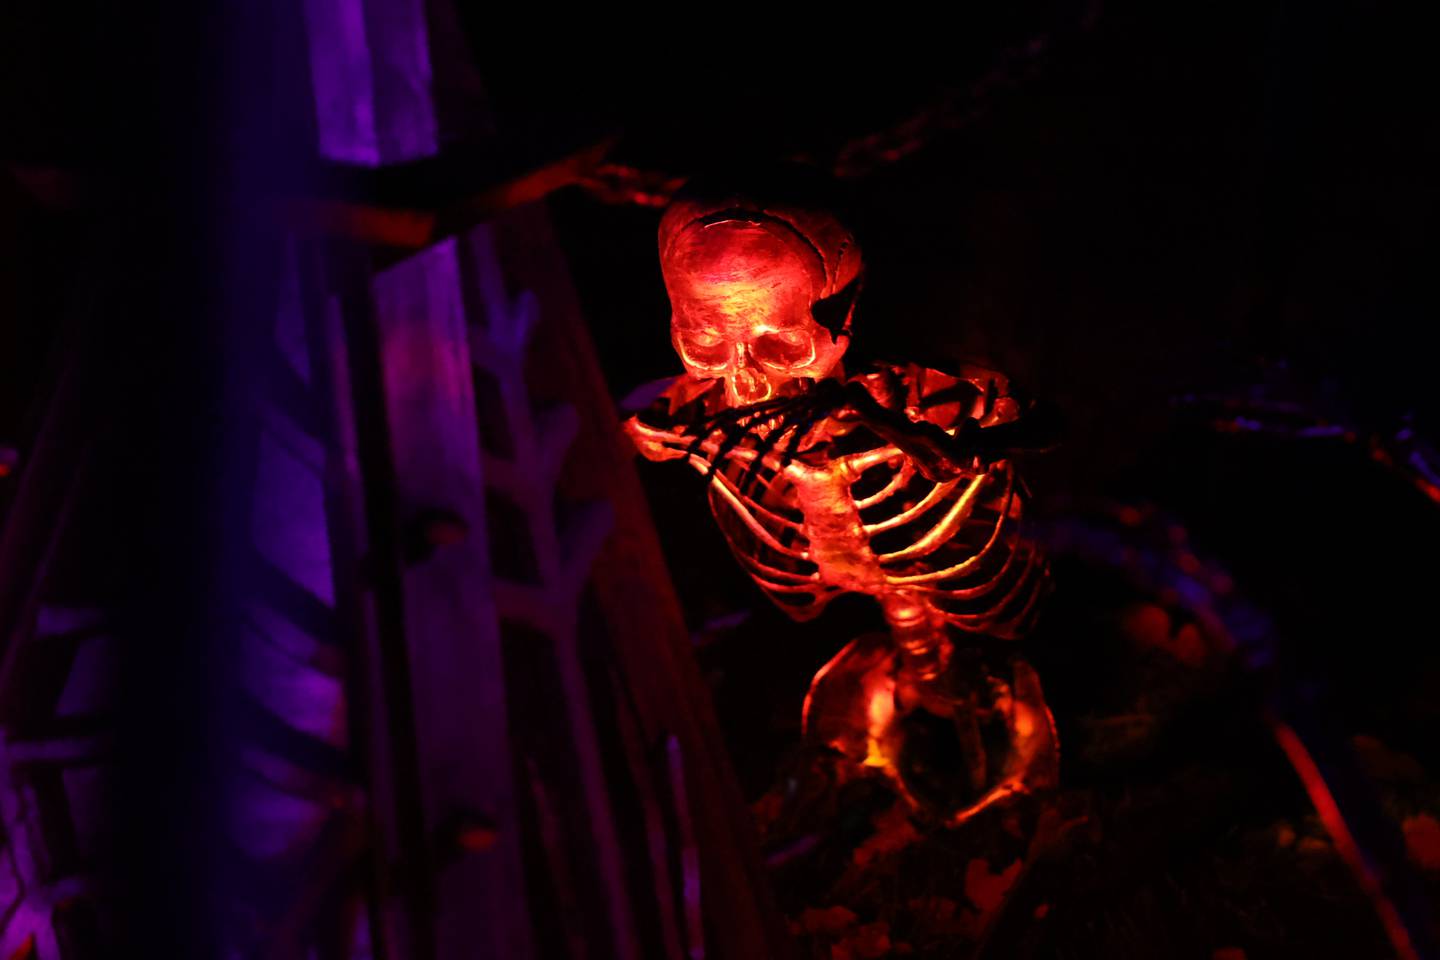 A skeleton is lite up outside the home of Jeff Eggener, a New Lenox carpenter. Jeff spent over a month re-siding his house, installing the plywood “haunted house” facade. Tuesday, Oct. 4, 2022, in New Lenox.